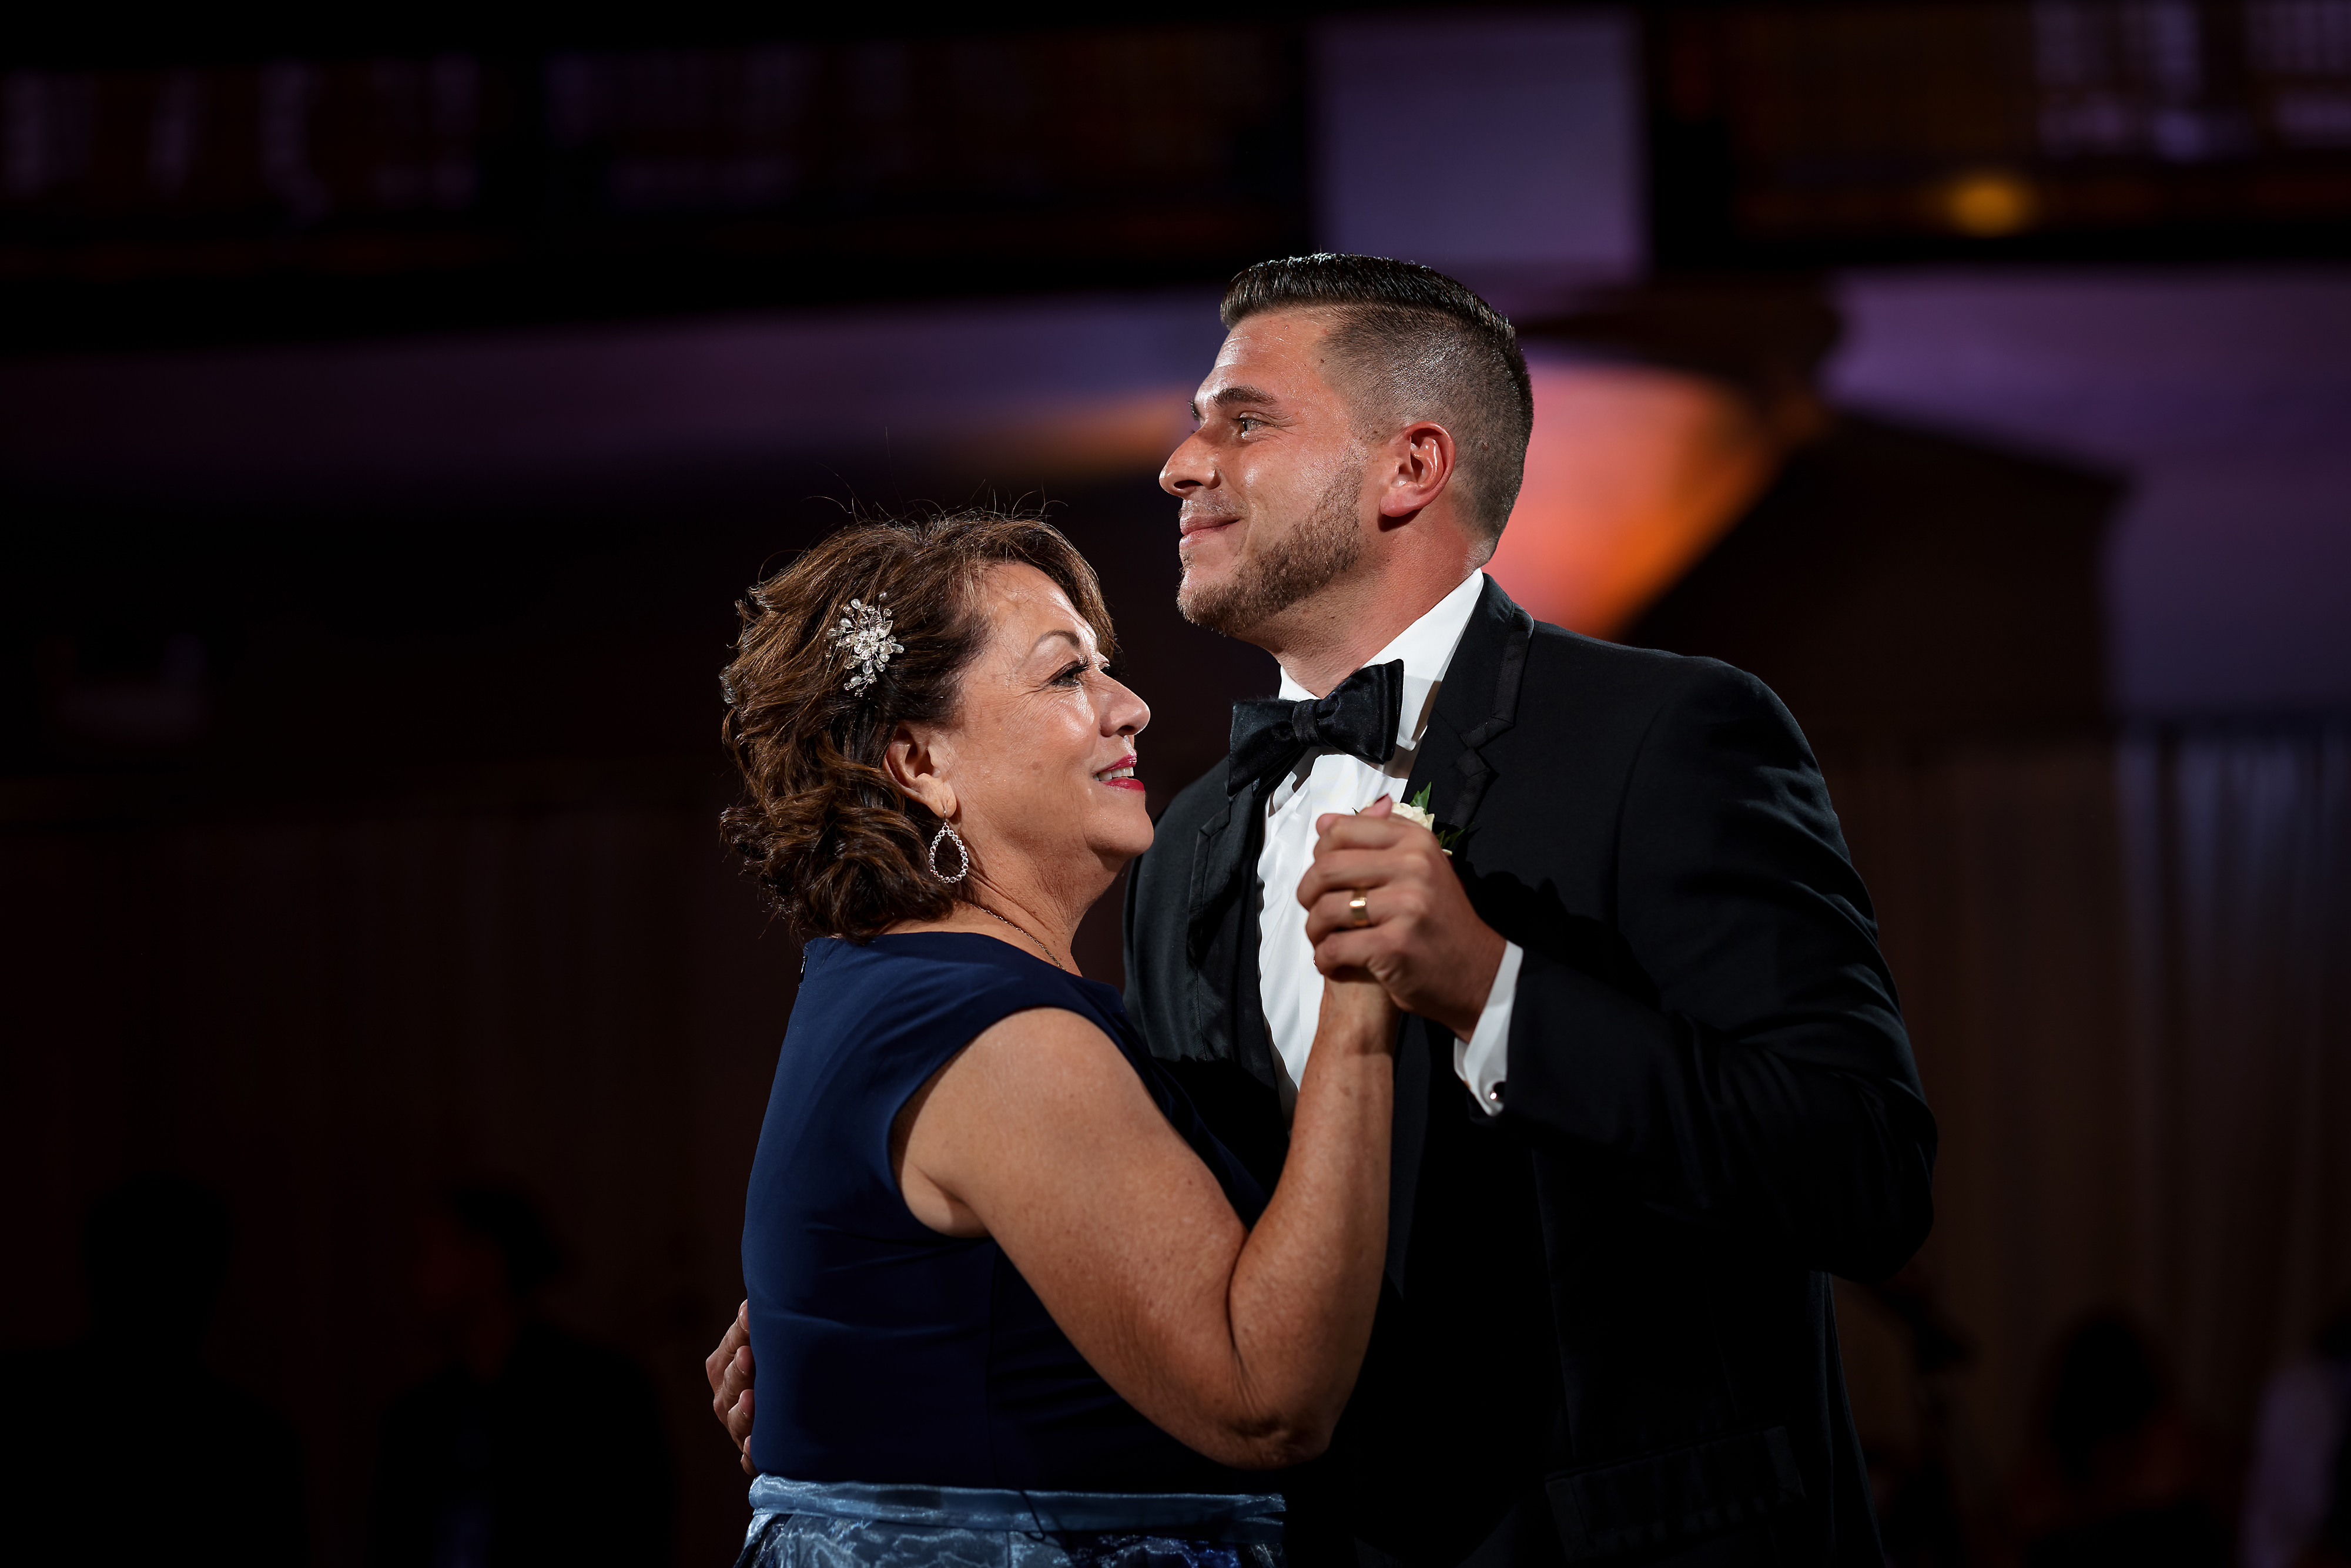 Groom dances with mom during wedding reception at Artifact Events in Chicago.